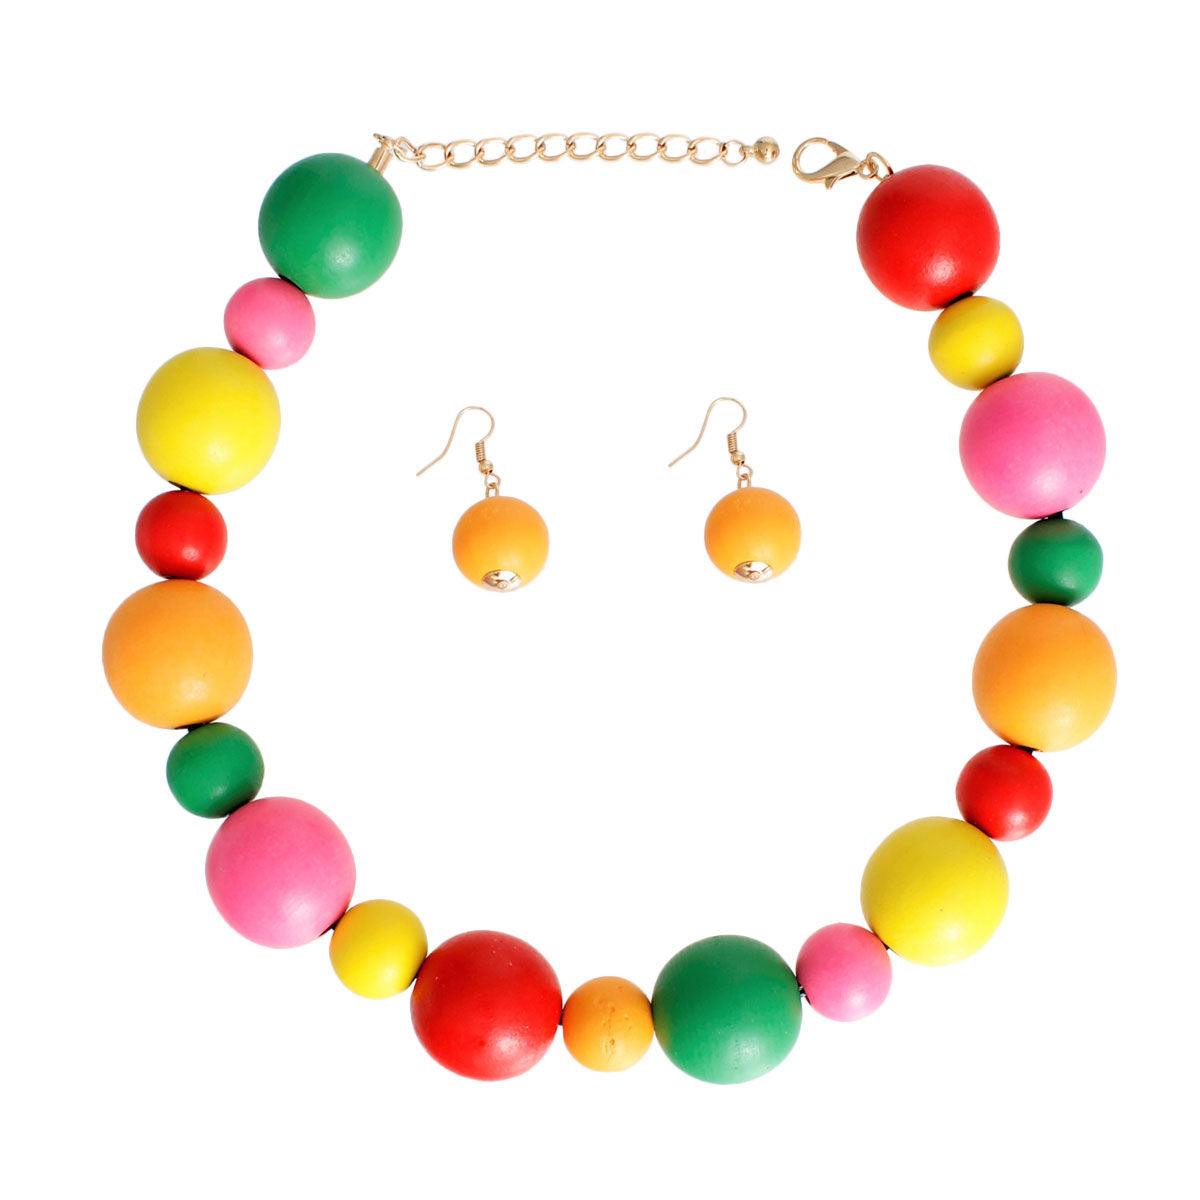 Unleash Your Style with Colorful Necklace Set - Shop Now!